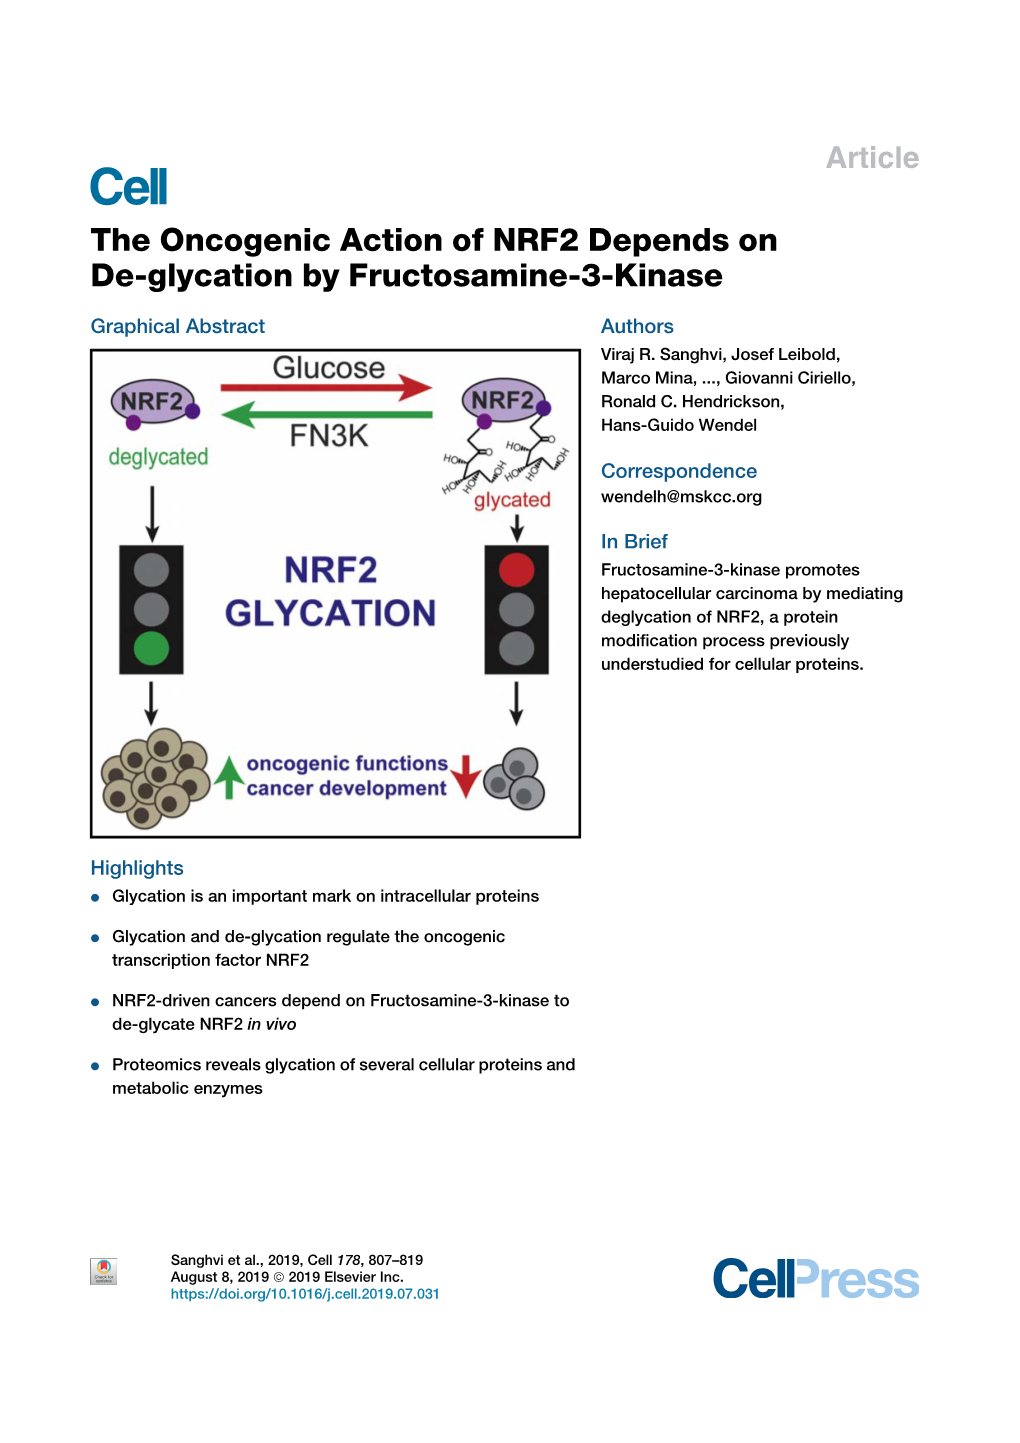 The Oncogenic Action of NRF2 Depends on De-Glycation by Fructosamine-3-Kinase